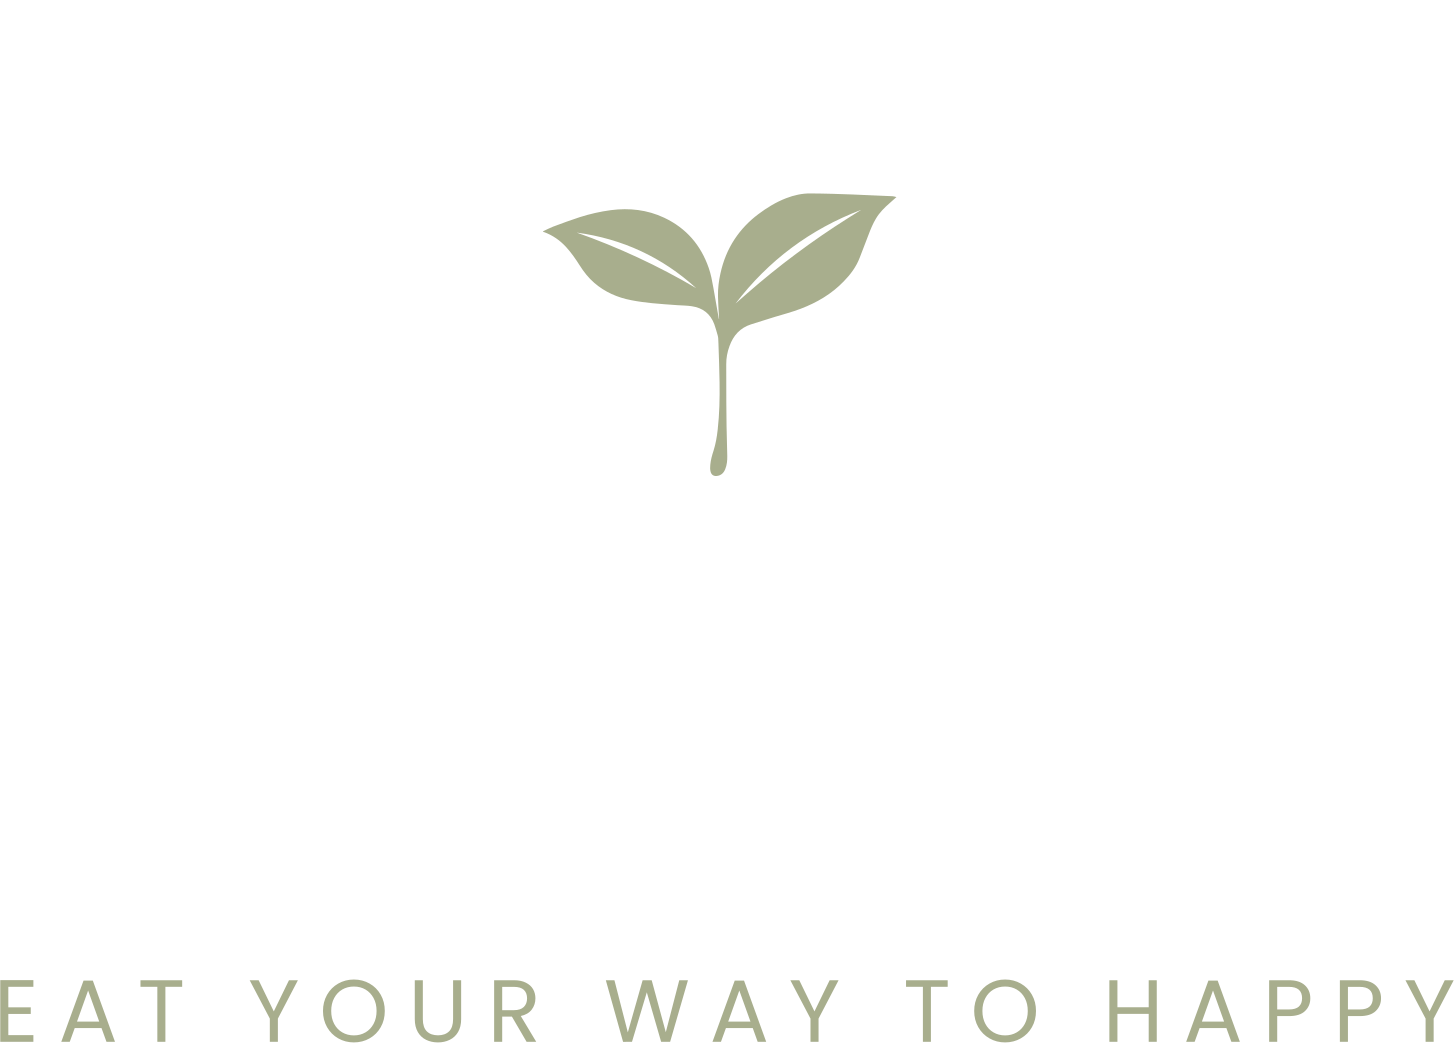 Transition Nutrition - Eat Your Way To Happy